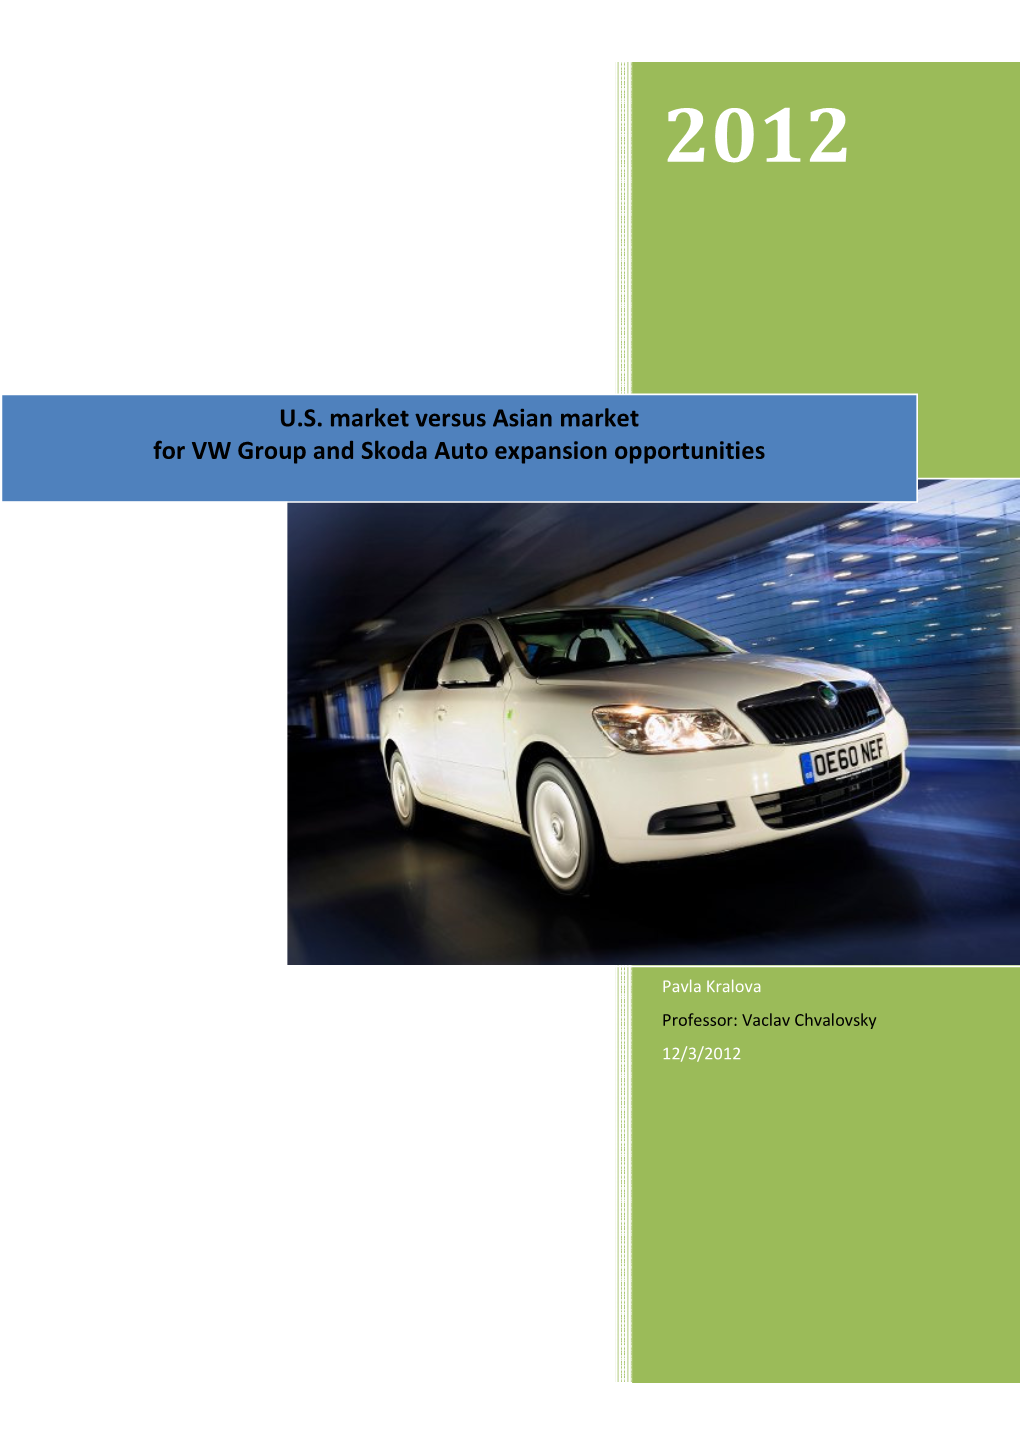 U.S. Market Versus Asian Market for VW Group and Skoda Auto Expansion Opportunities